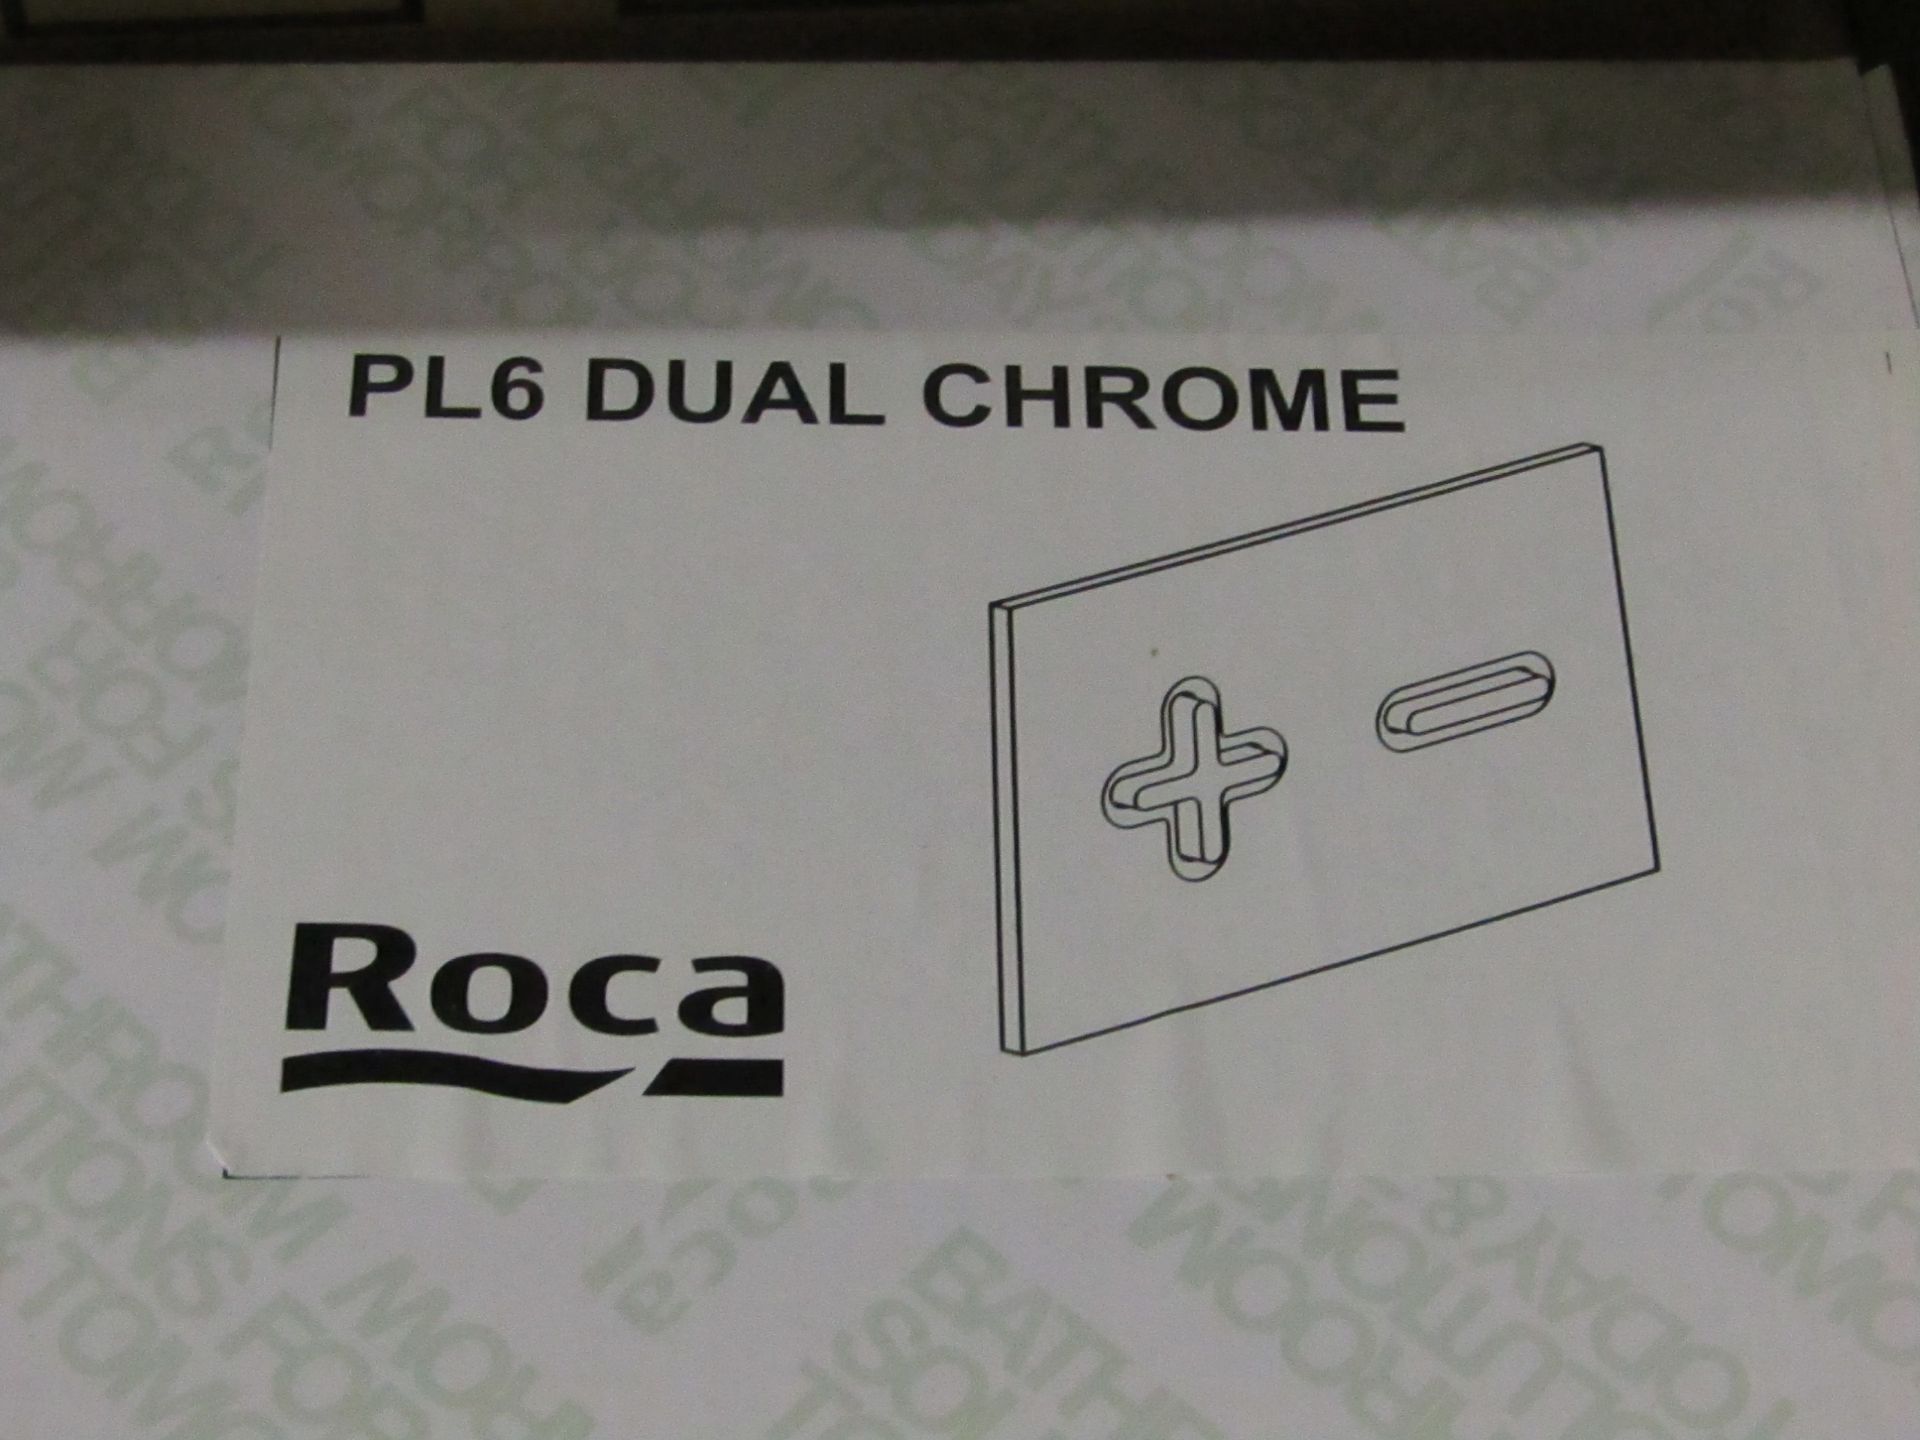 Roca PL6 Dual Chrome Flush Plate. New & boxed, RRP £39 at Cityplumbing.co.uk - Image 2 of 2